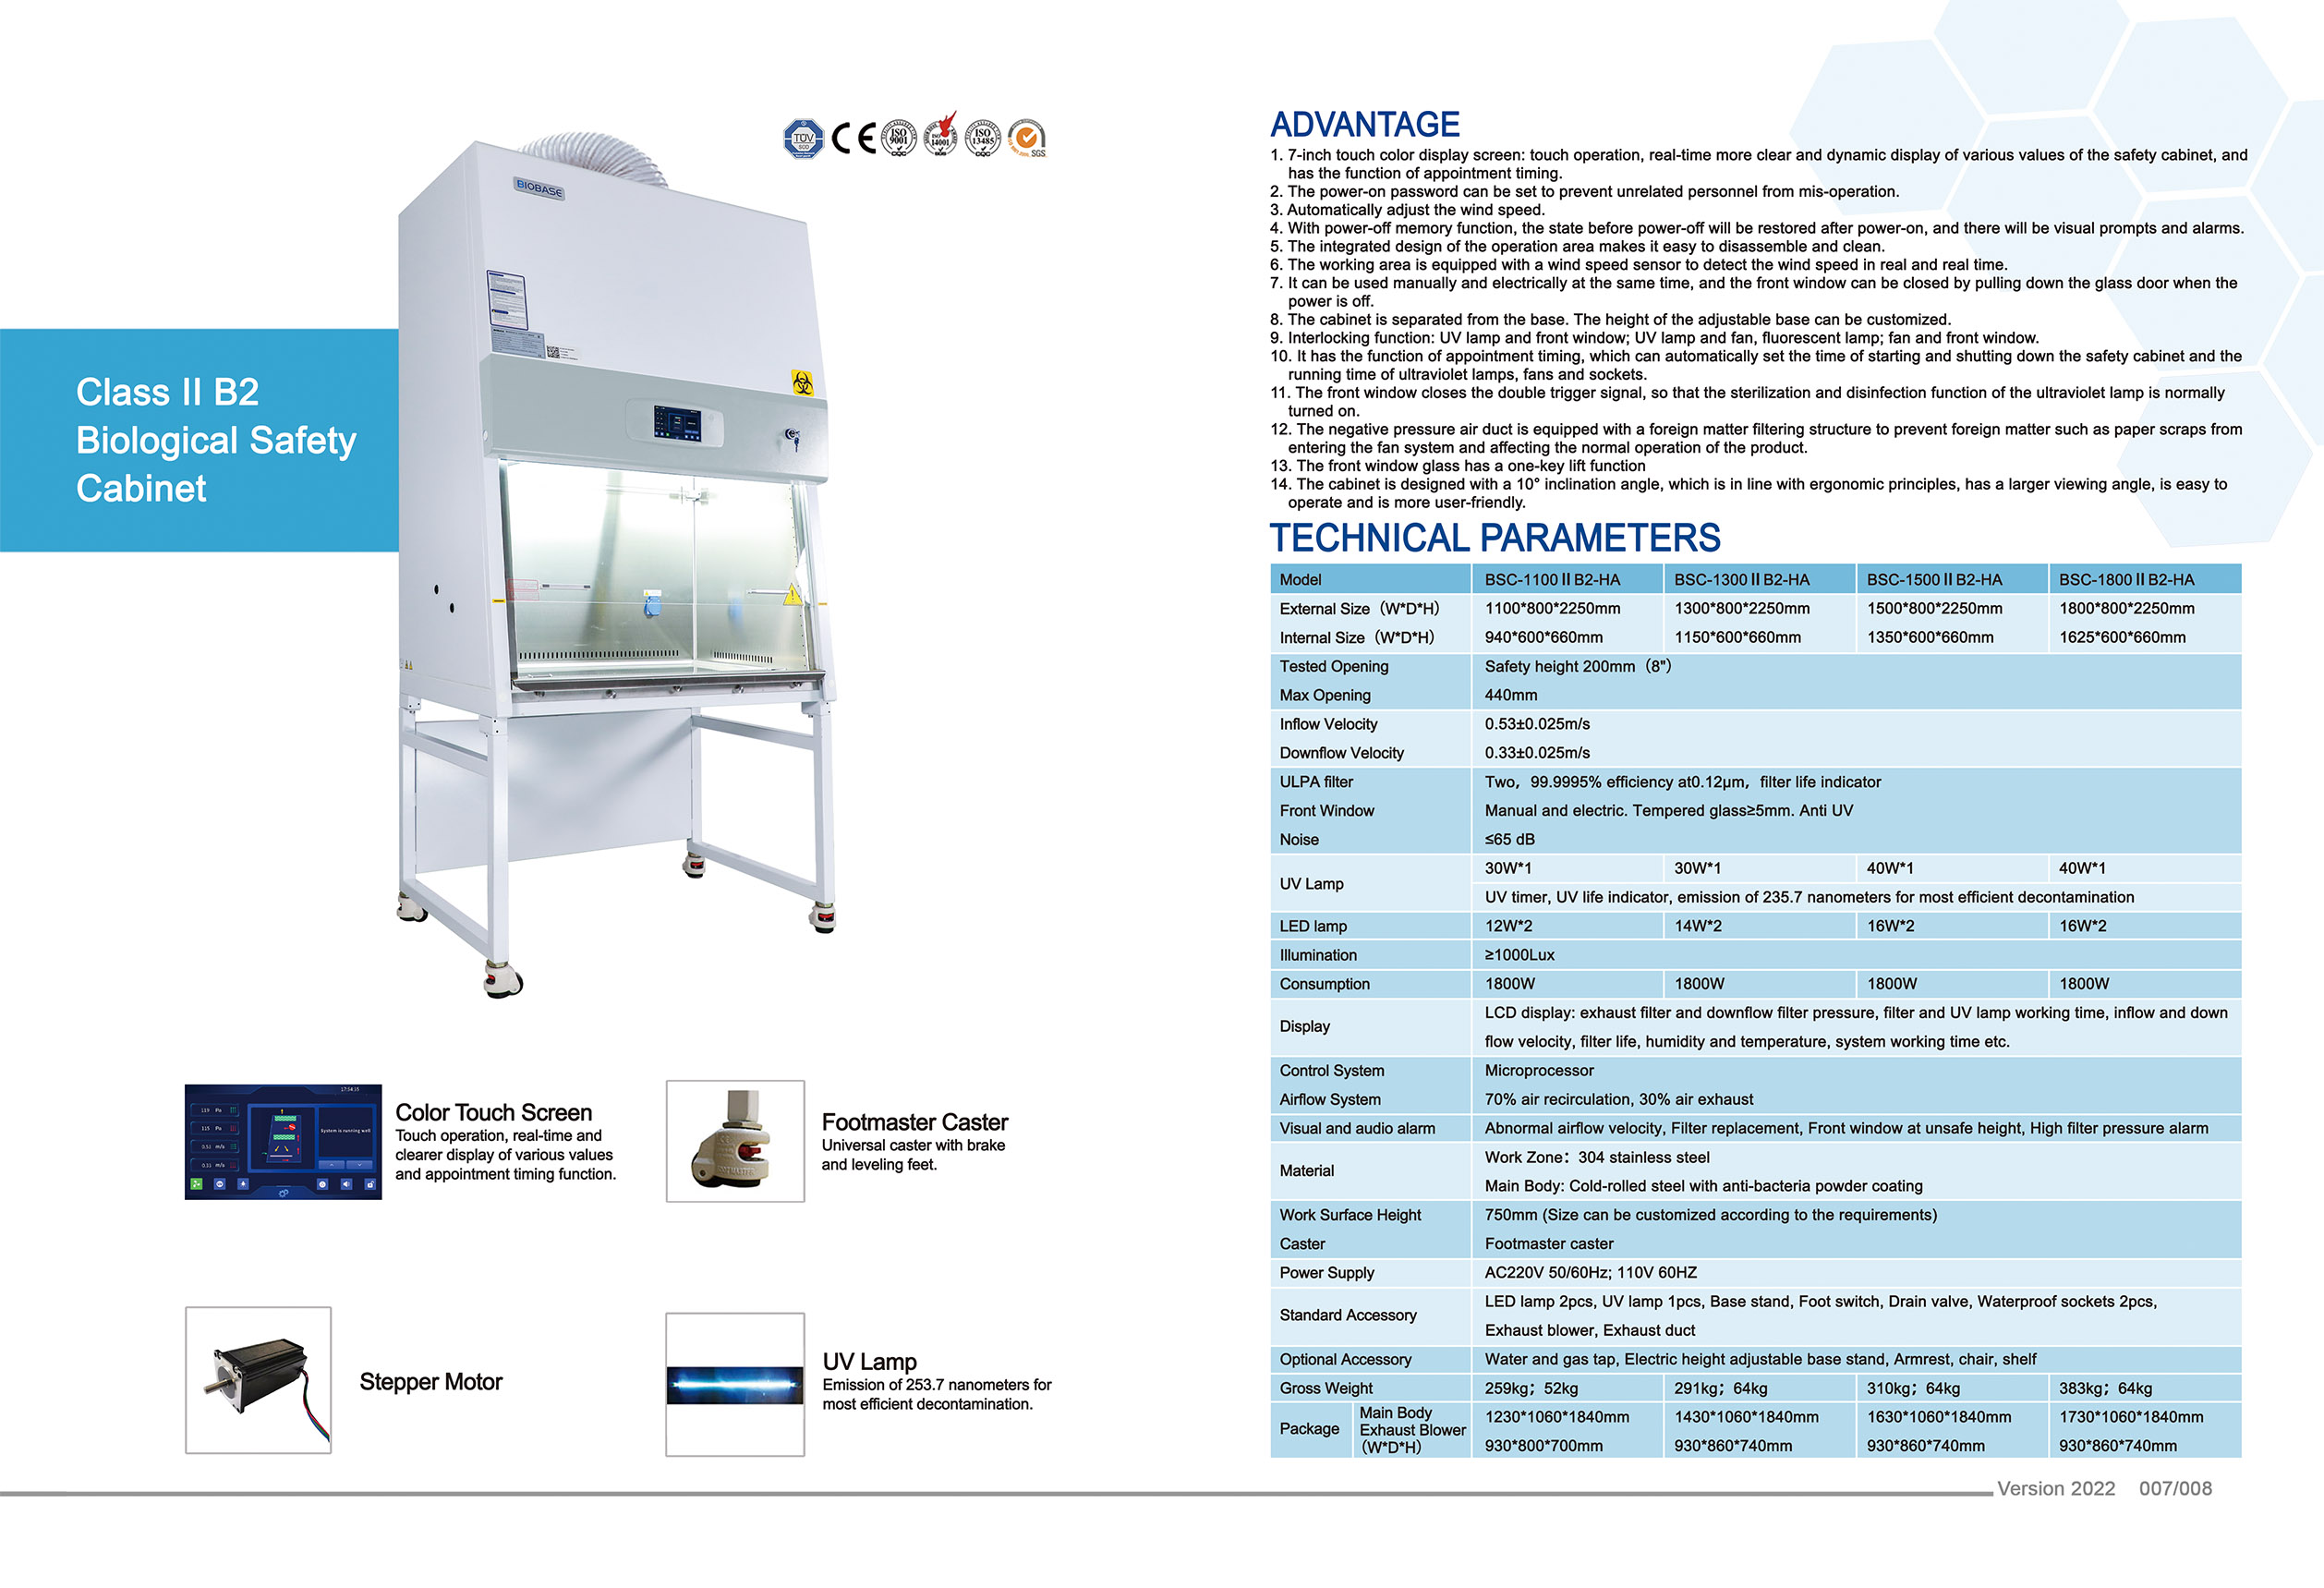 Class II B2 Biological Safety Cabinet